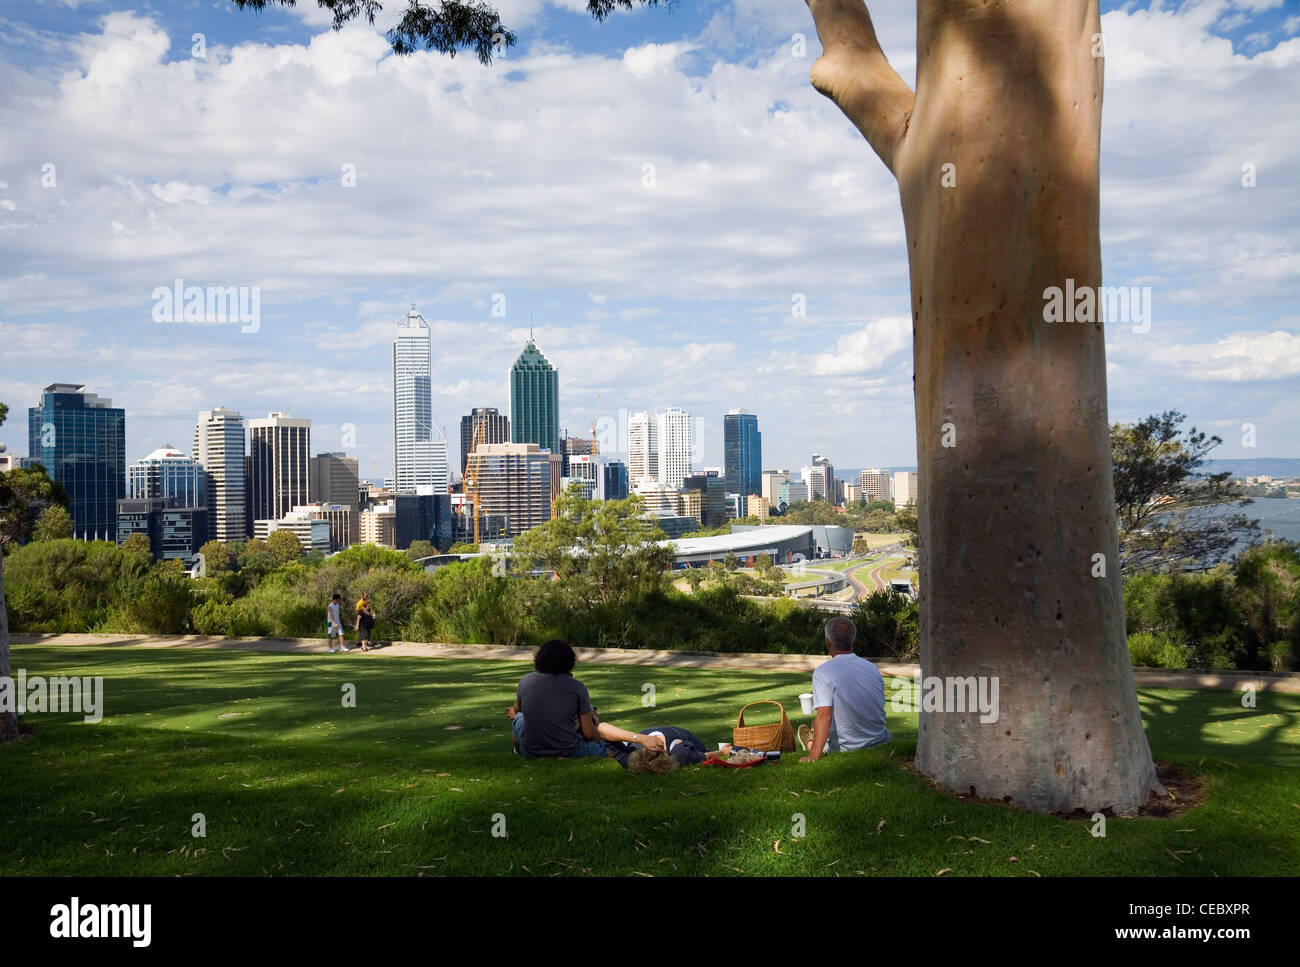 Couple having picnic under the shade of a tree in Kings Park, overlooking Perth city. Perth, Western Australia, AUSTRALIA Stock Photo